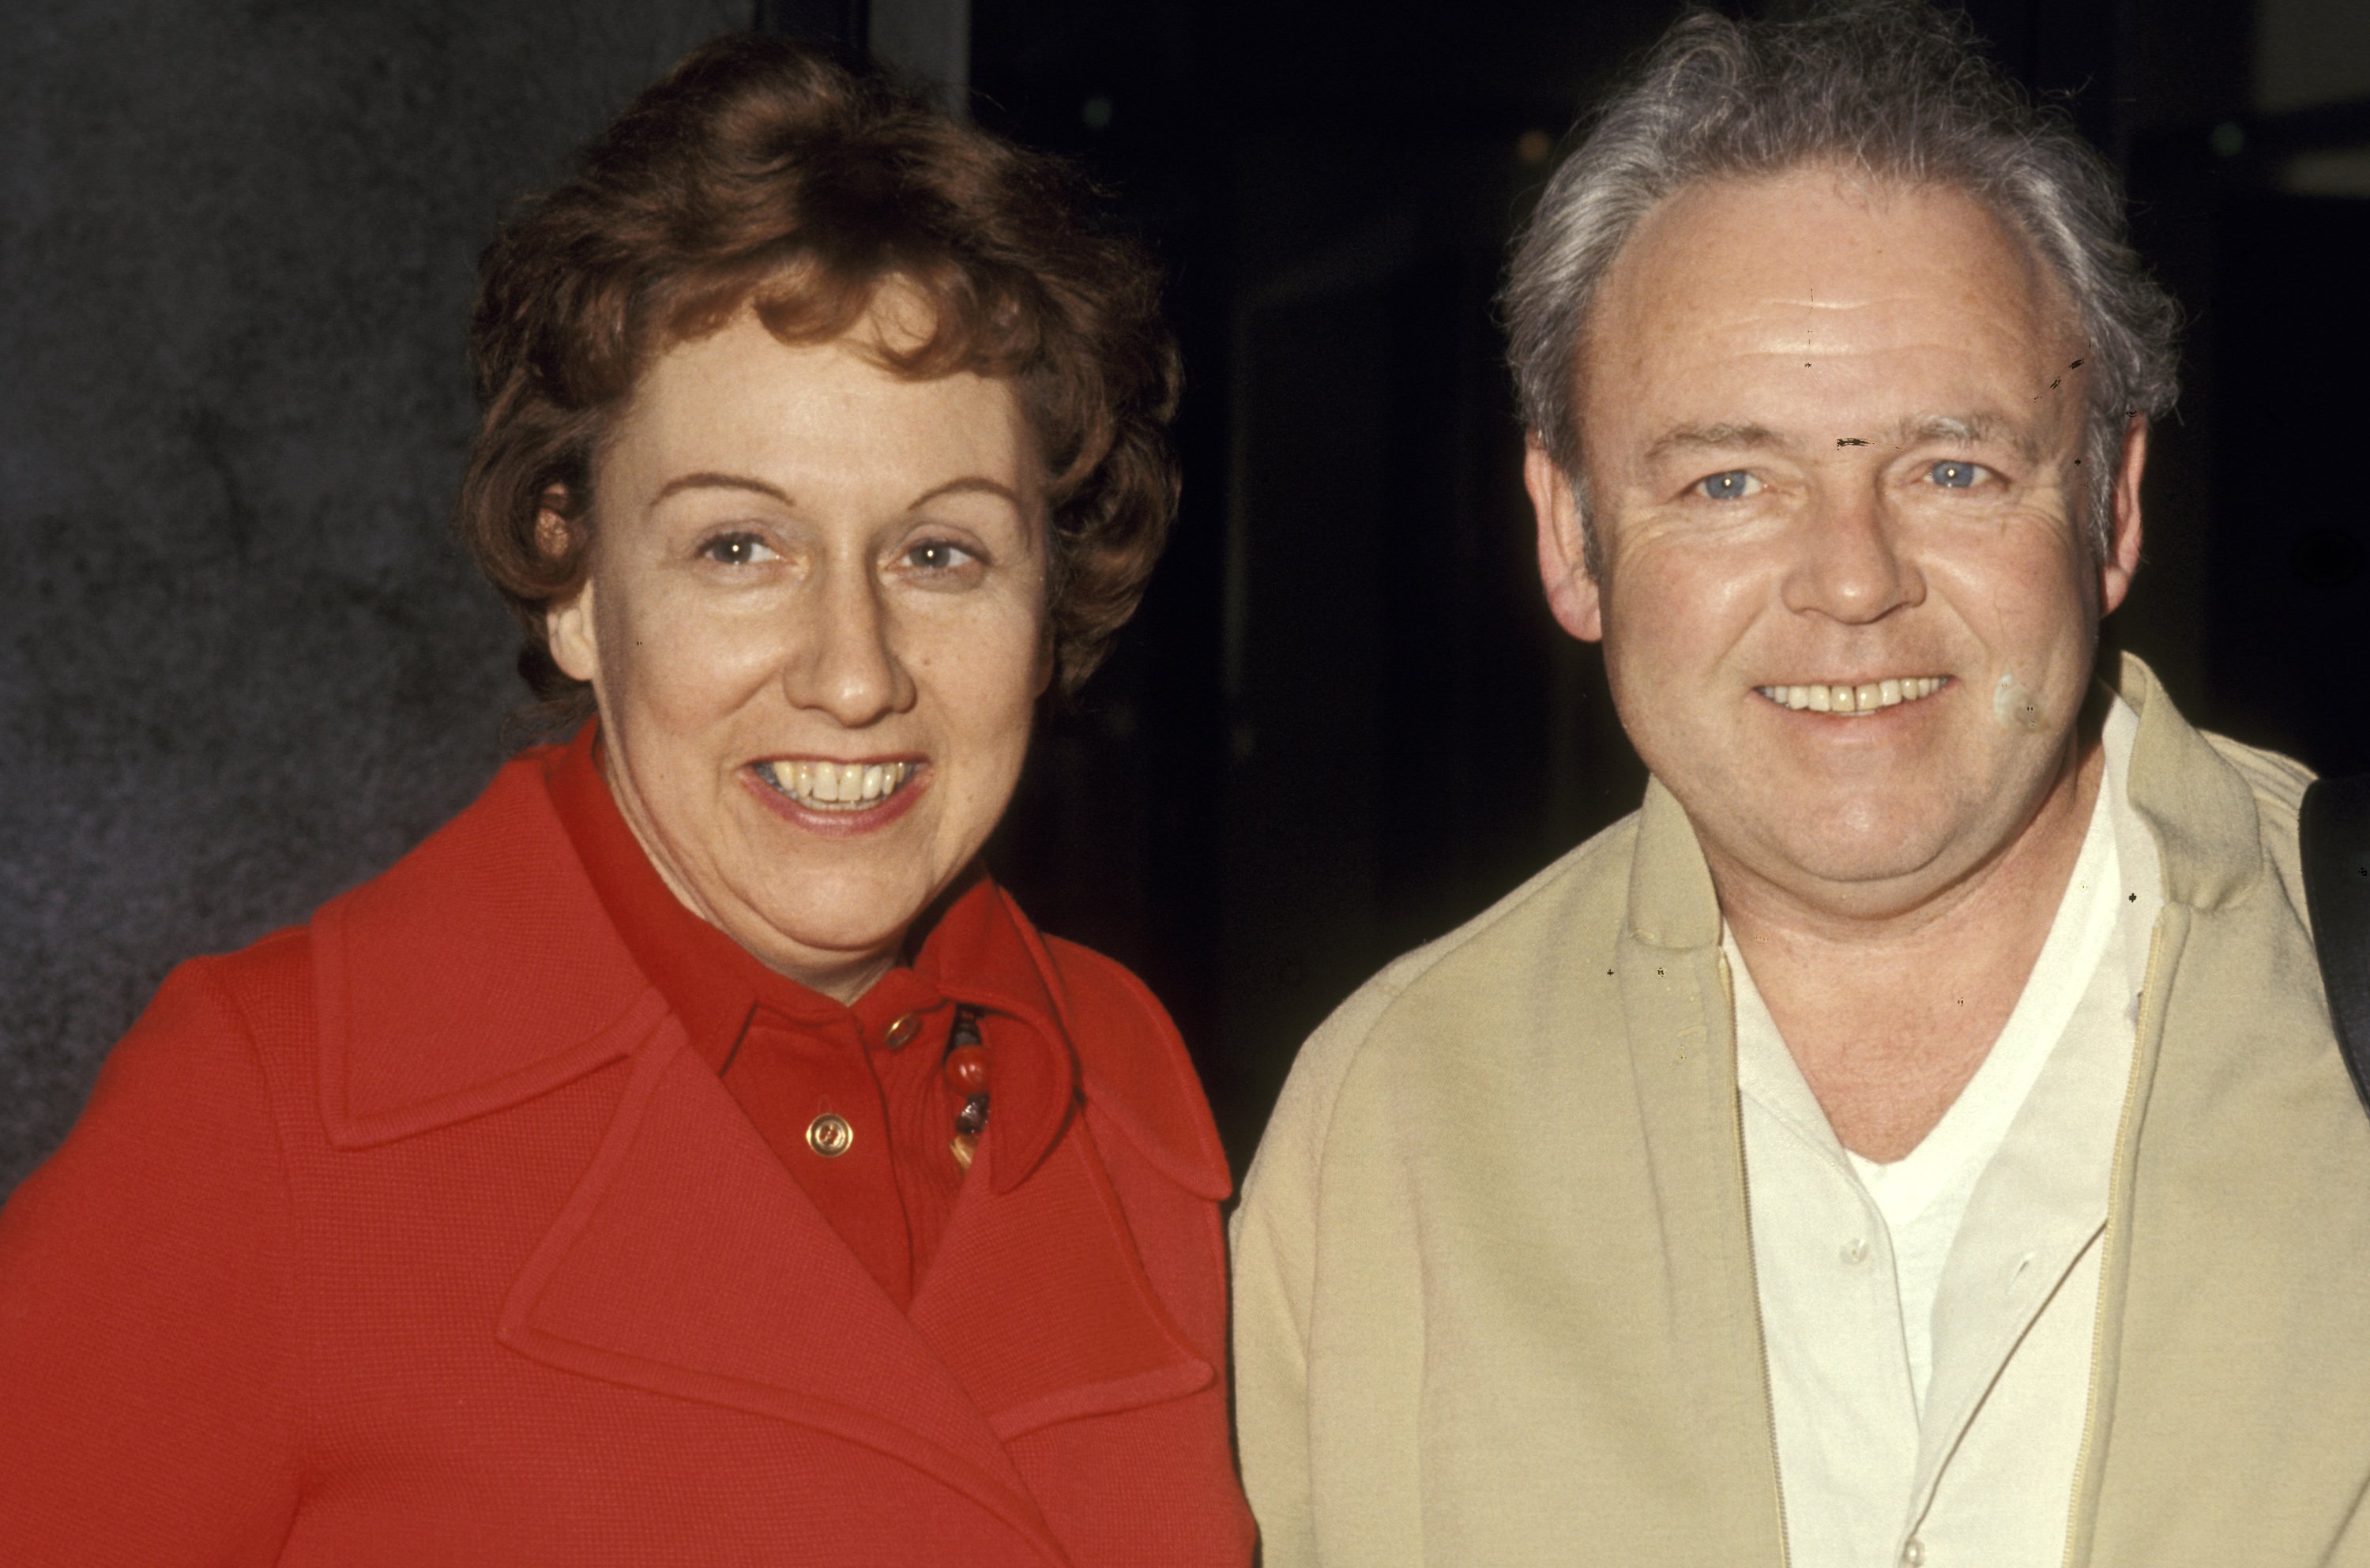 Jean Stapleton and Carroll O'Connor in 1972 | Ron Galella/Ron Galella Collection via Getty Images